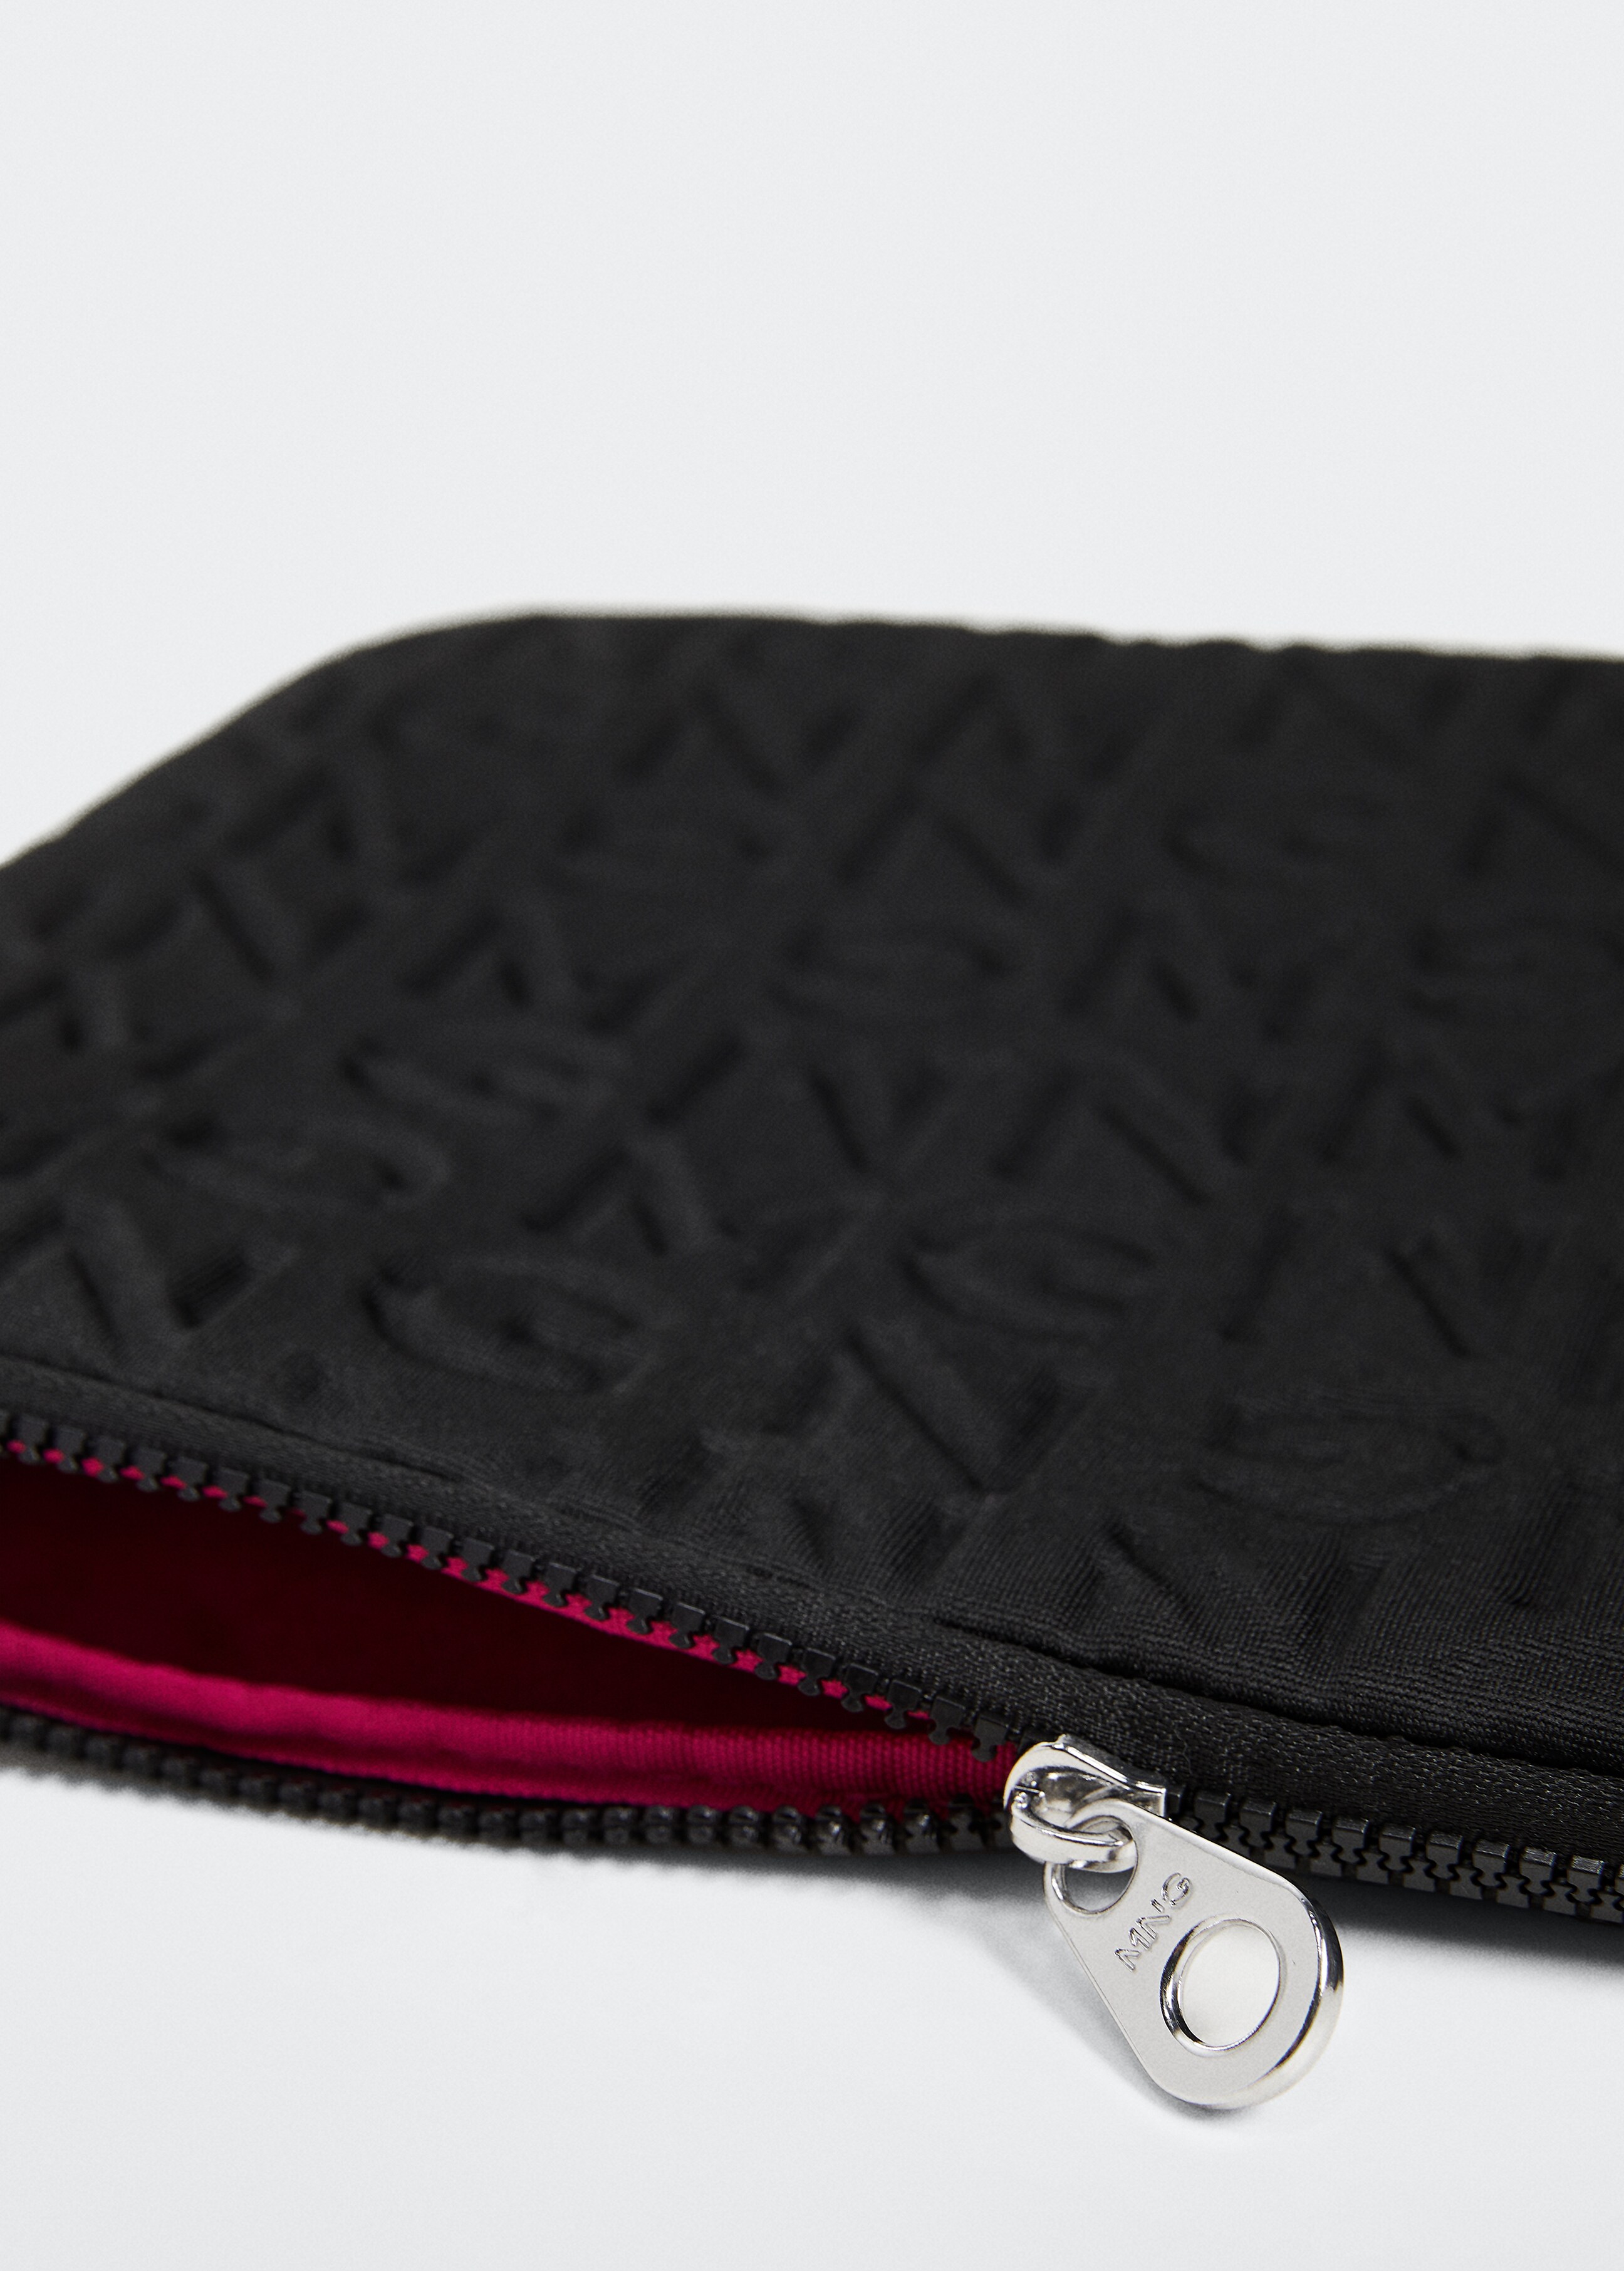 Padded laptop case - Details of the article 1